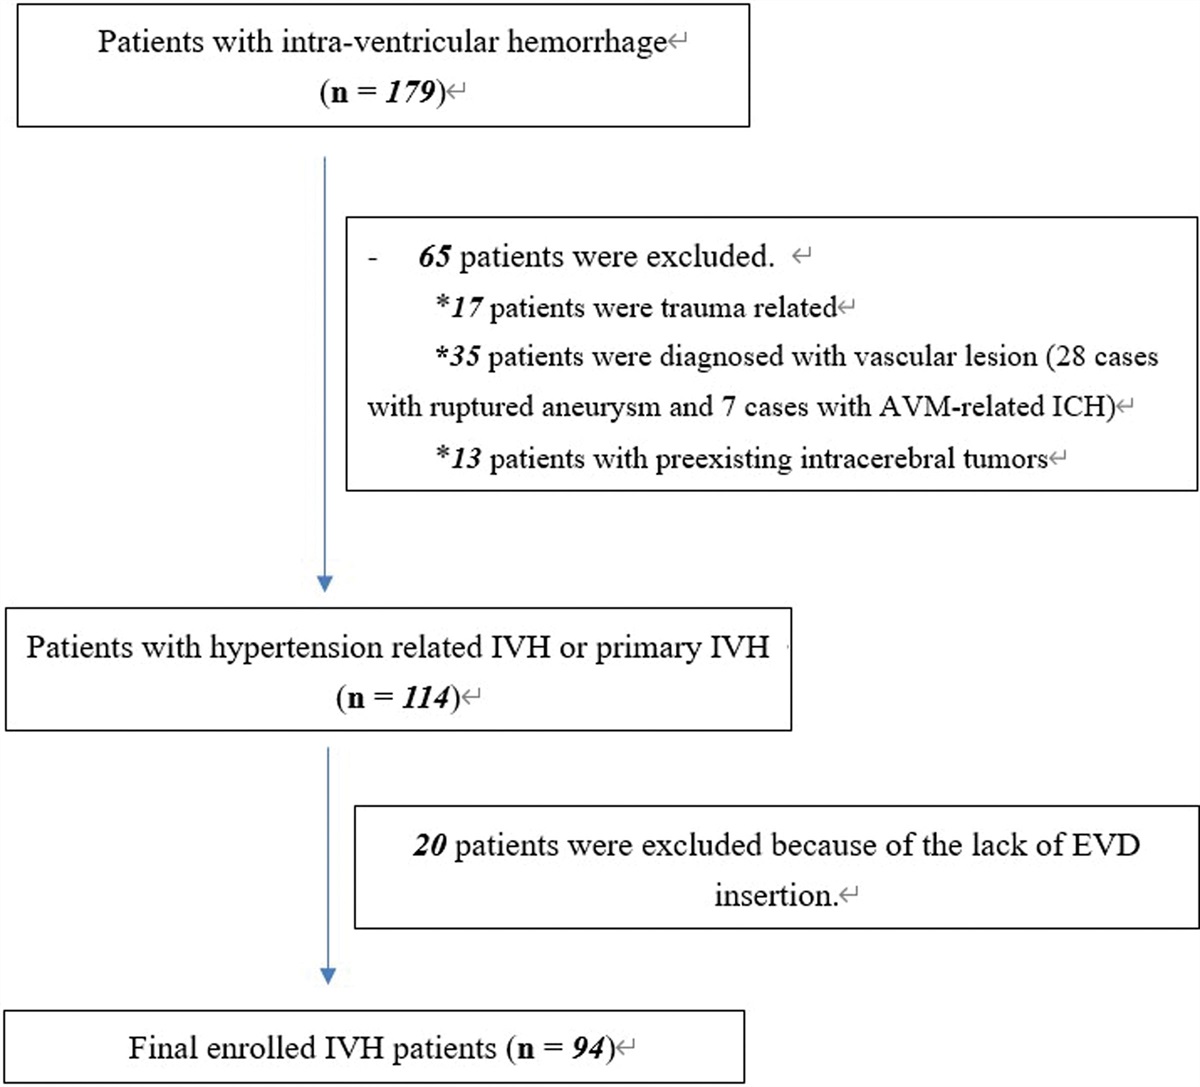 Urokinase administration for intraventricular hemorrhage in adults: A retrospective analysis of hemorrhage volume reduction and clinical outcomes